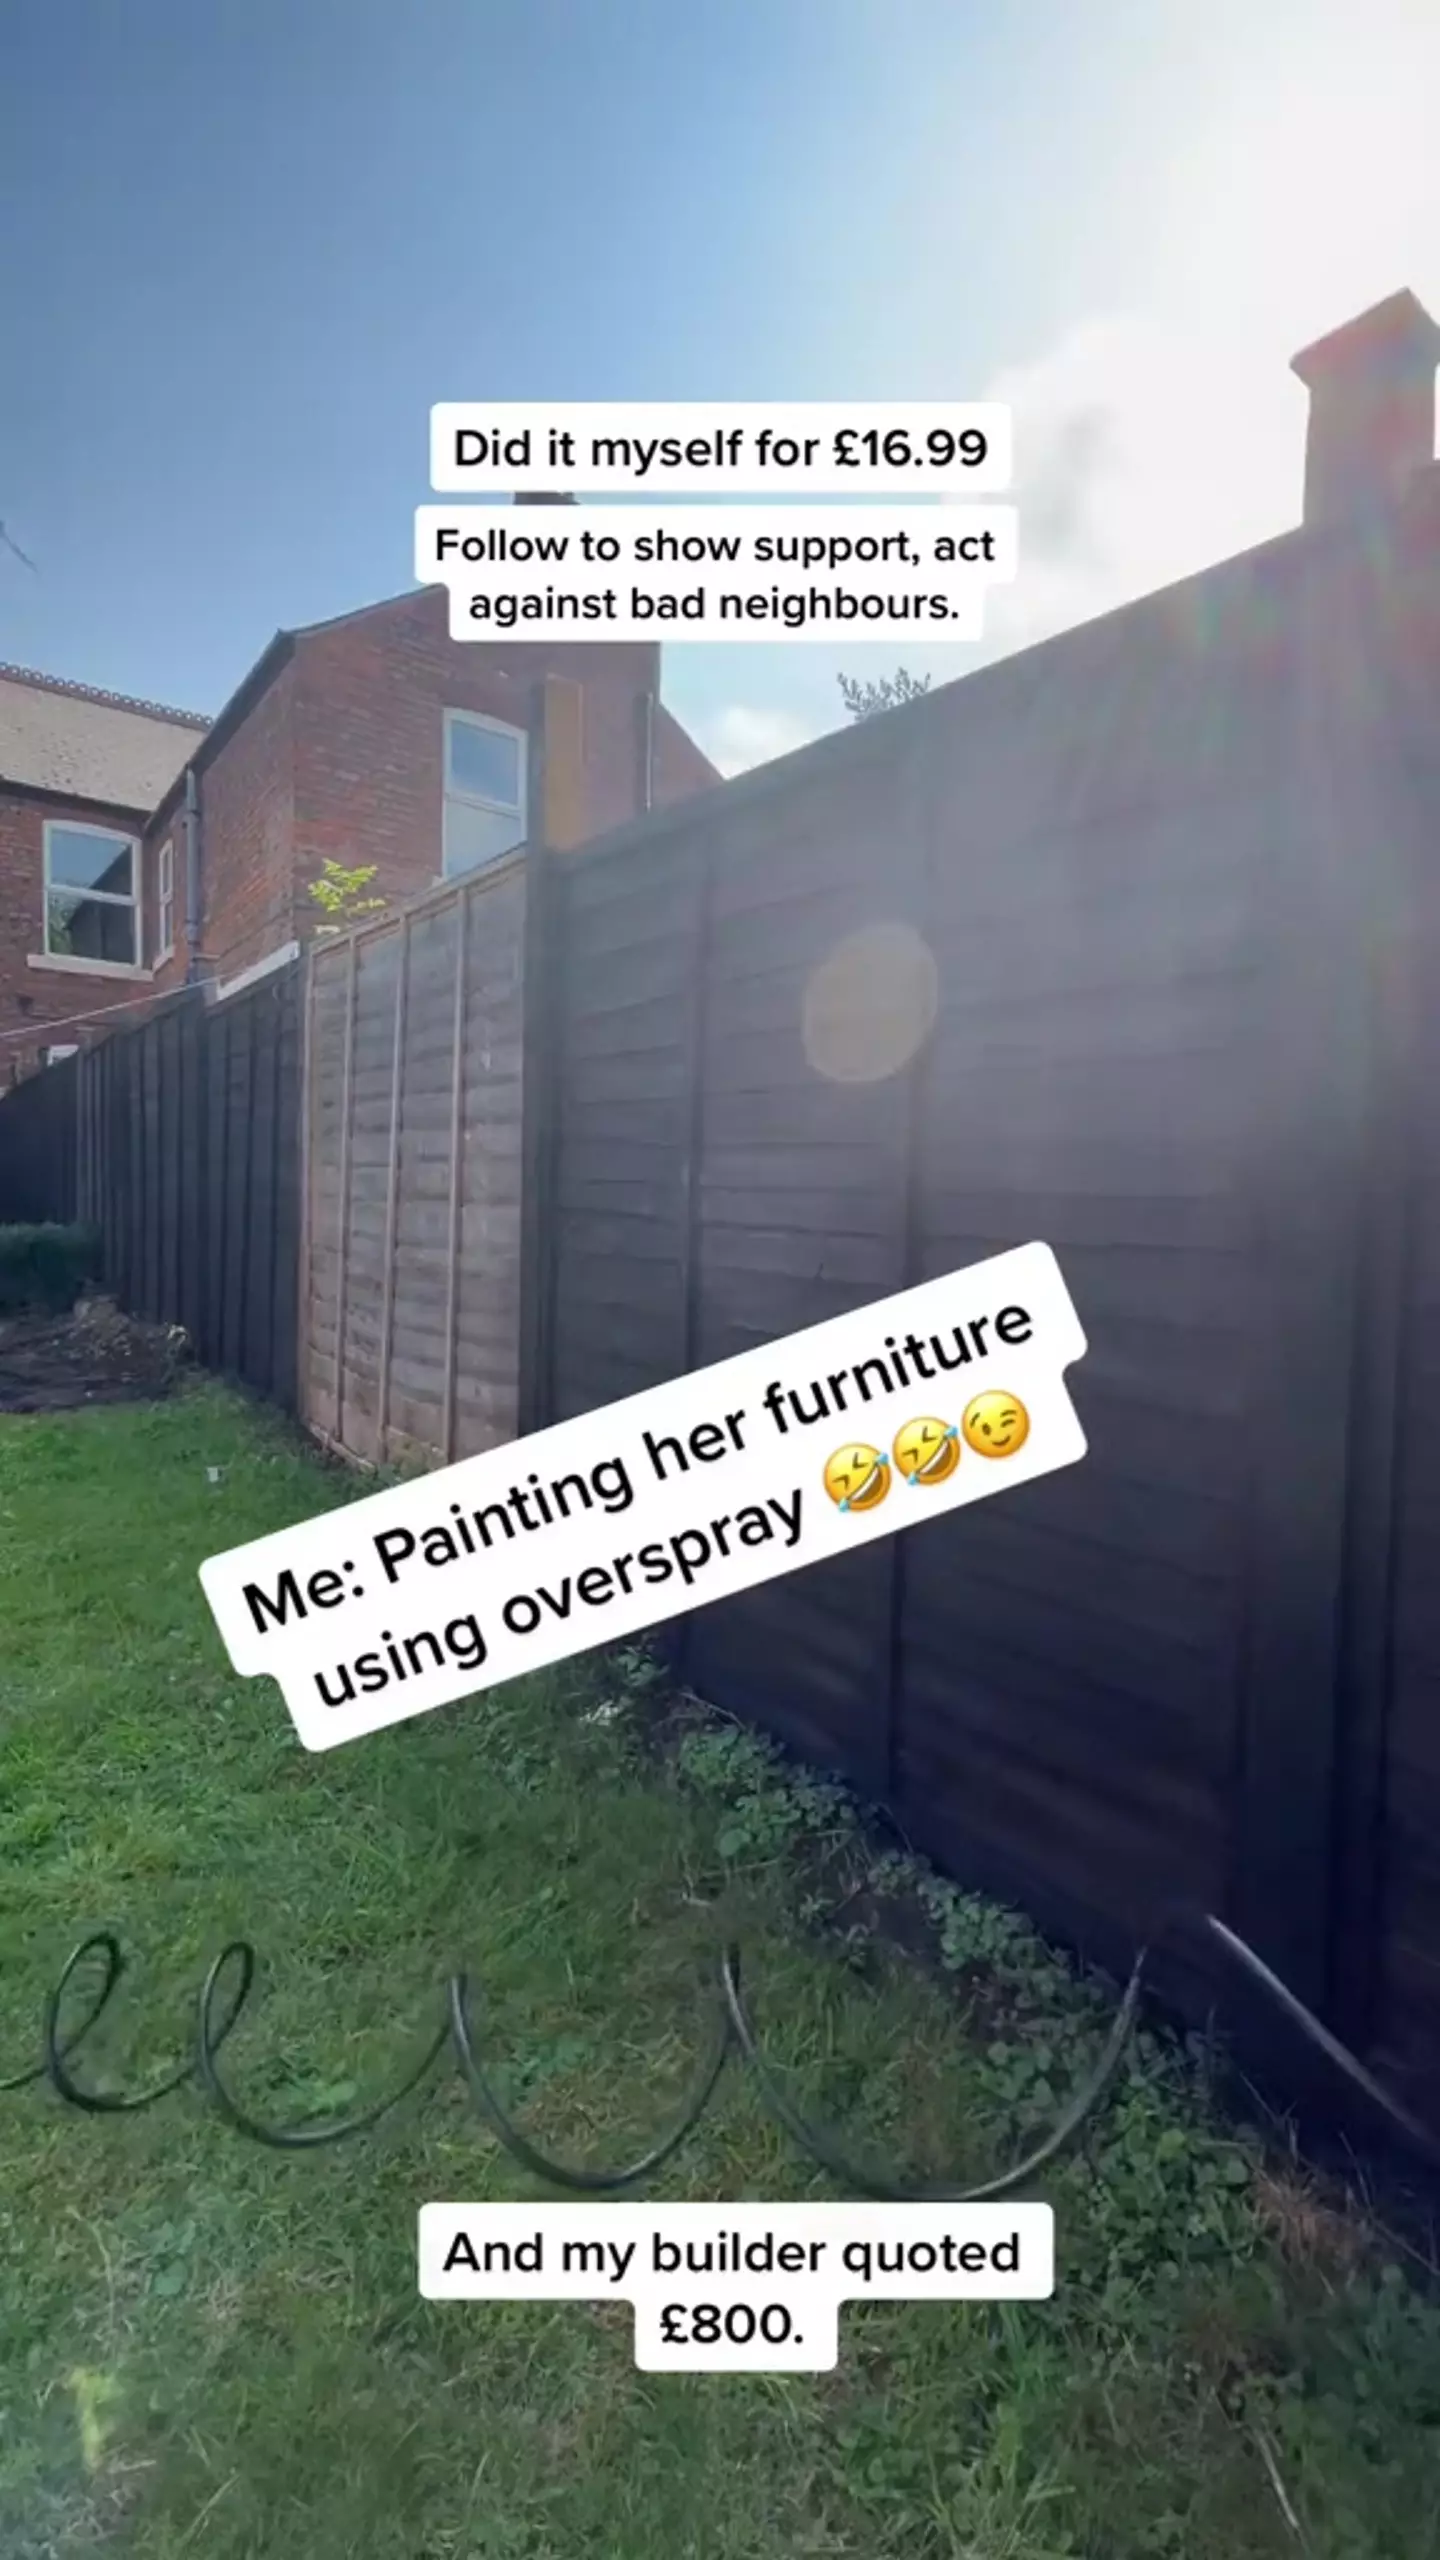 A man who was fed up by his neighbour for apparently refusing to fix her adjoining fence has decided to take matters into his own hands.